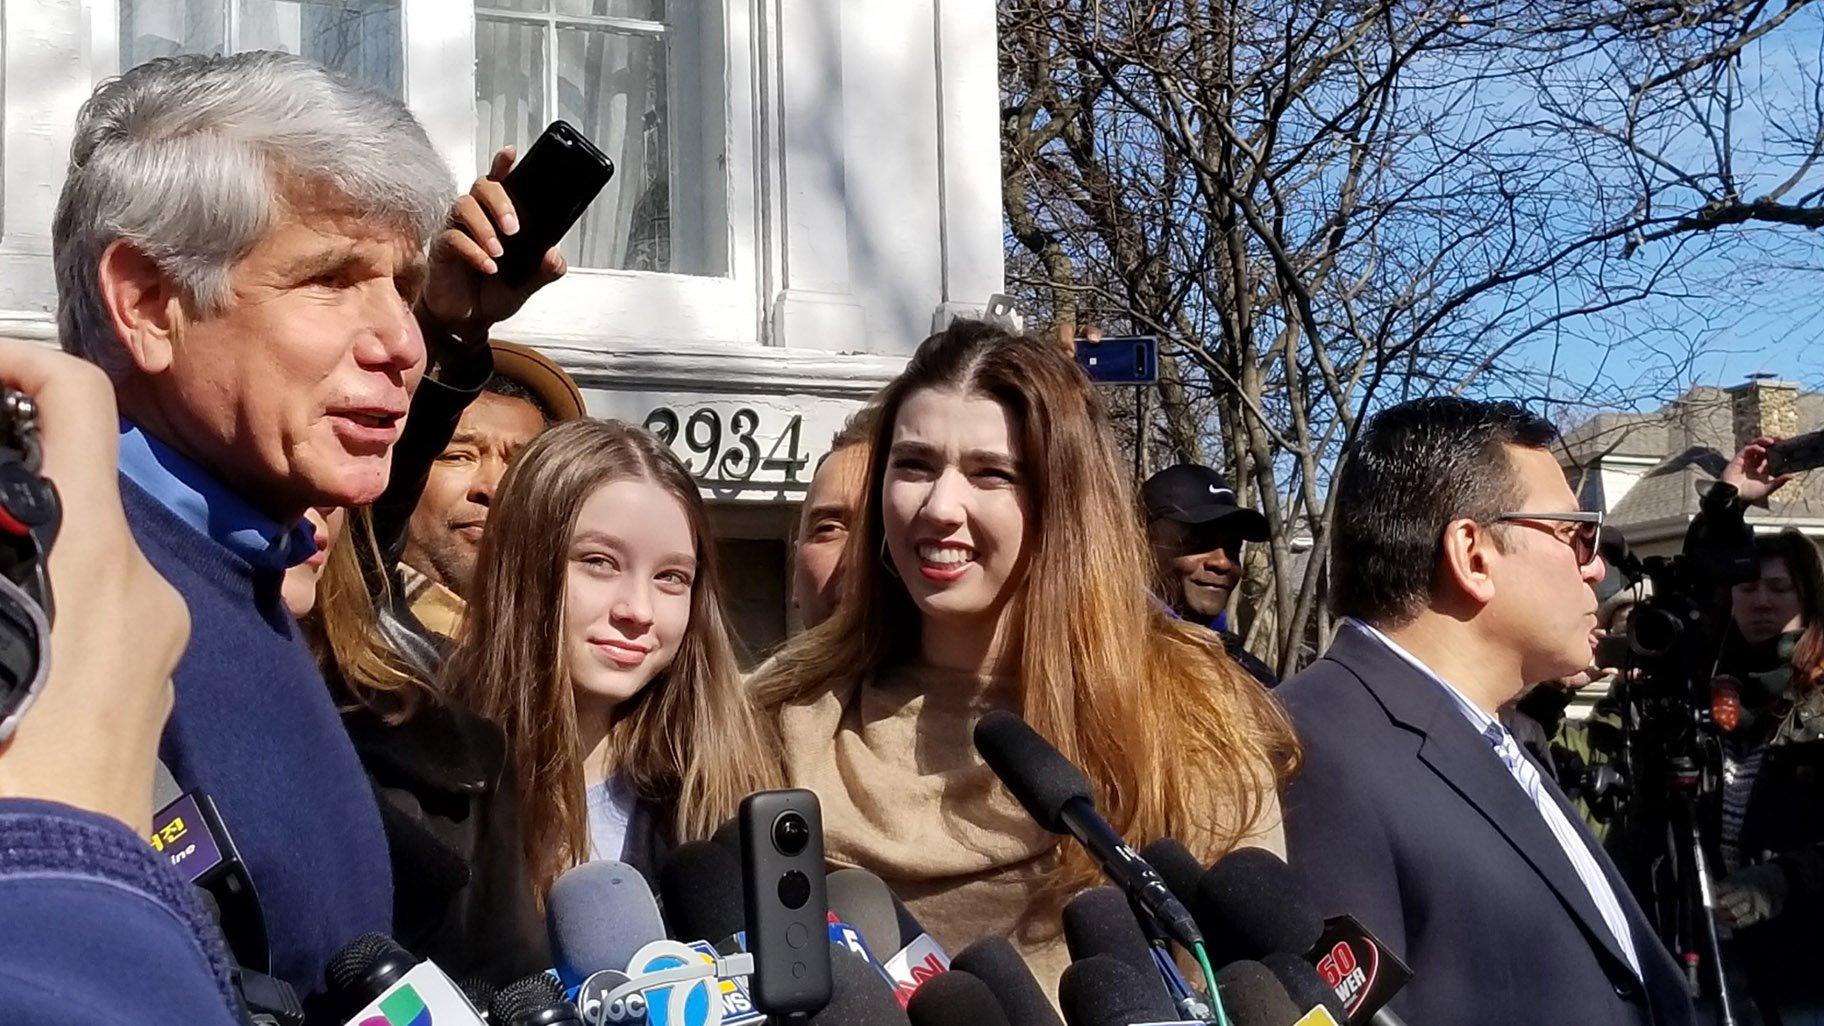 Former Illinois Gov. Rod Blagojevich speaks to the media outside his Ravenswood Manor home on Feb. 19, 2020, a day after his 14-year sentence was cut short by President Donald Trump. (Matt Masterson / WTTW News)